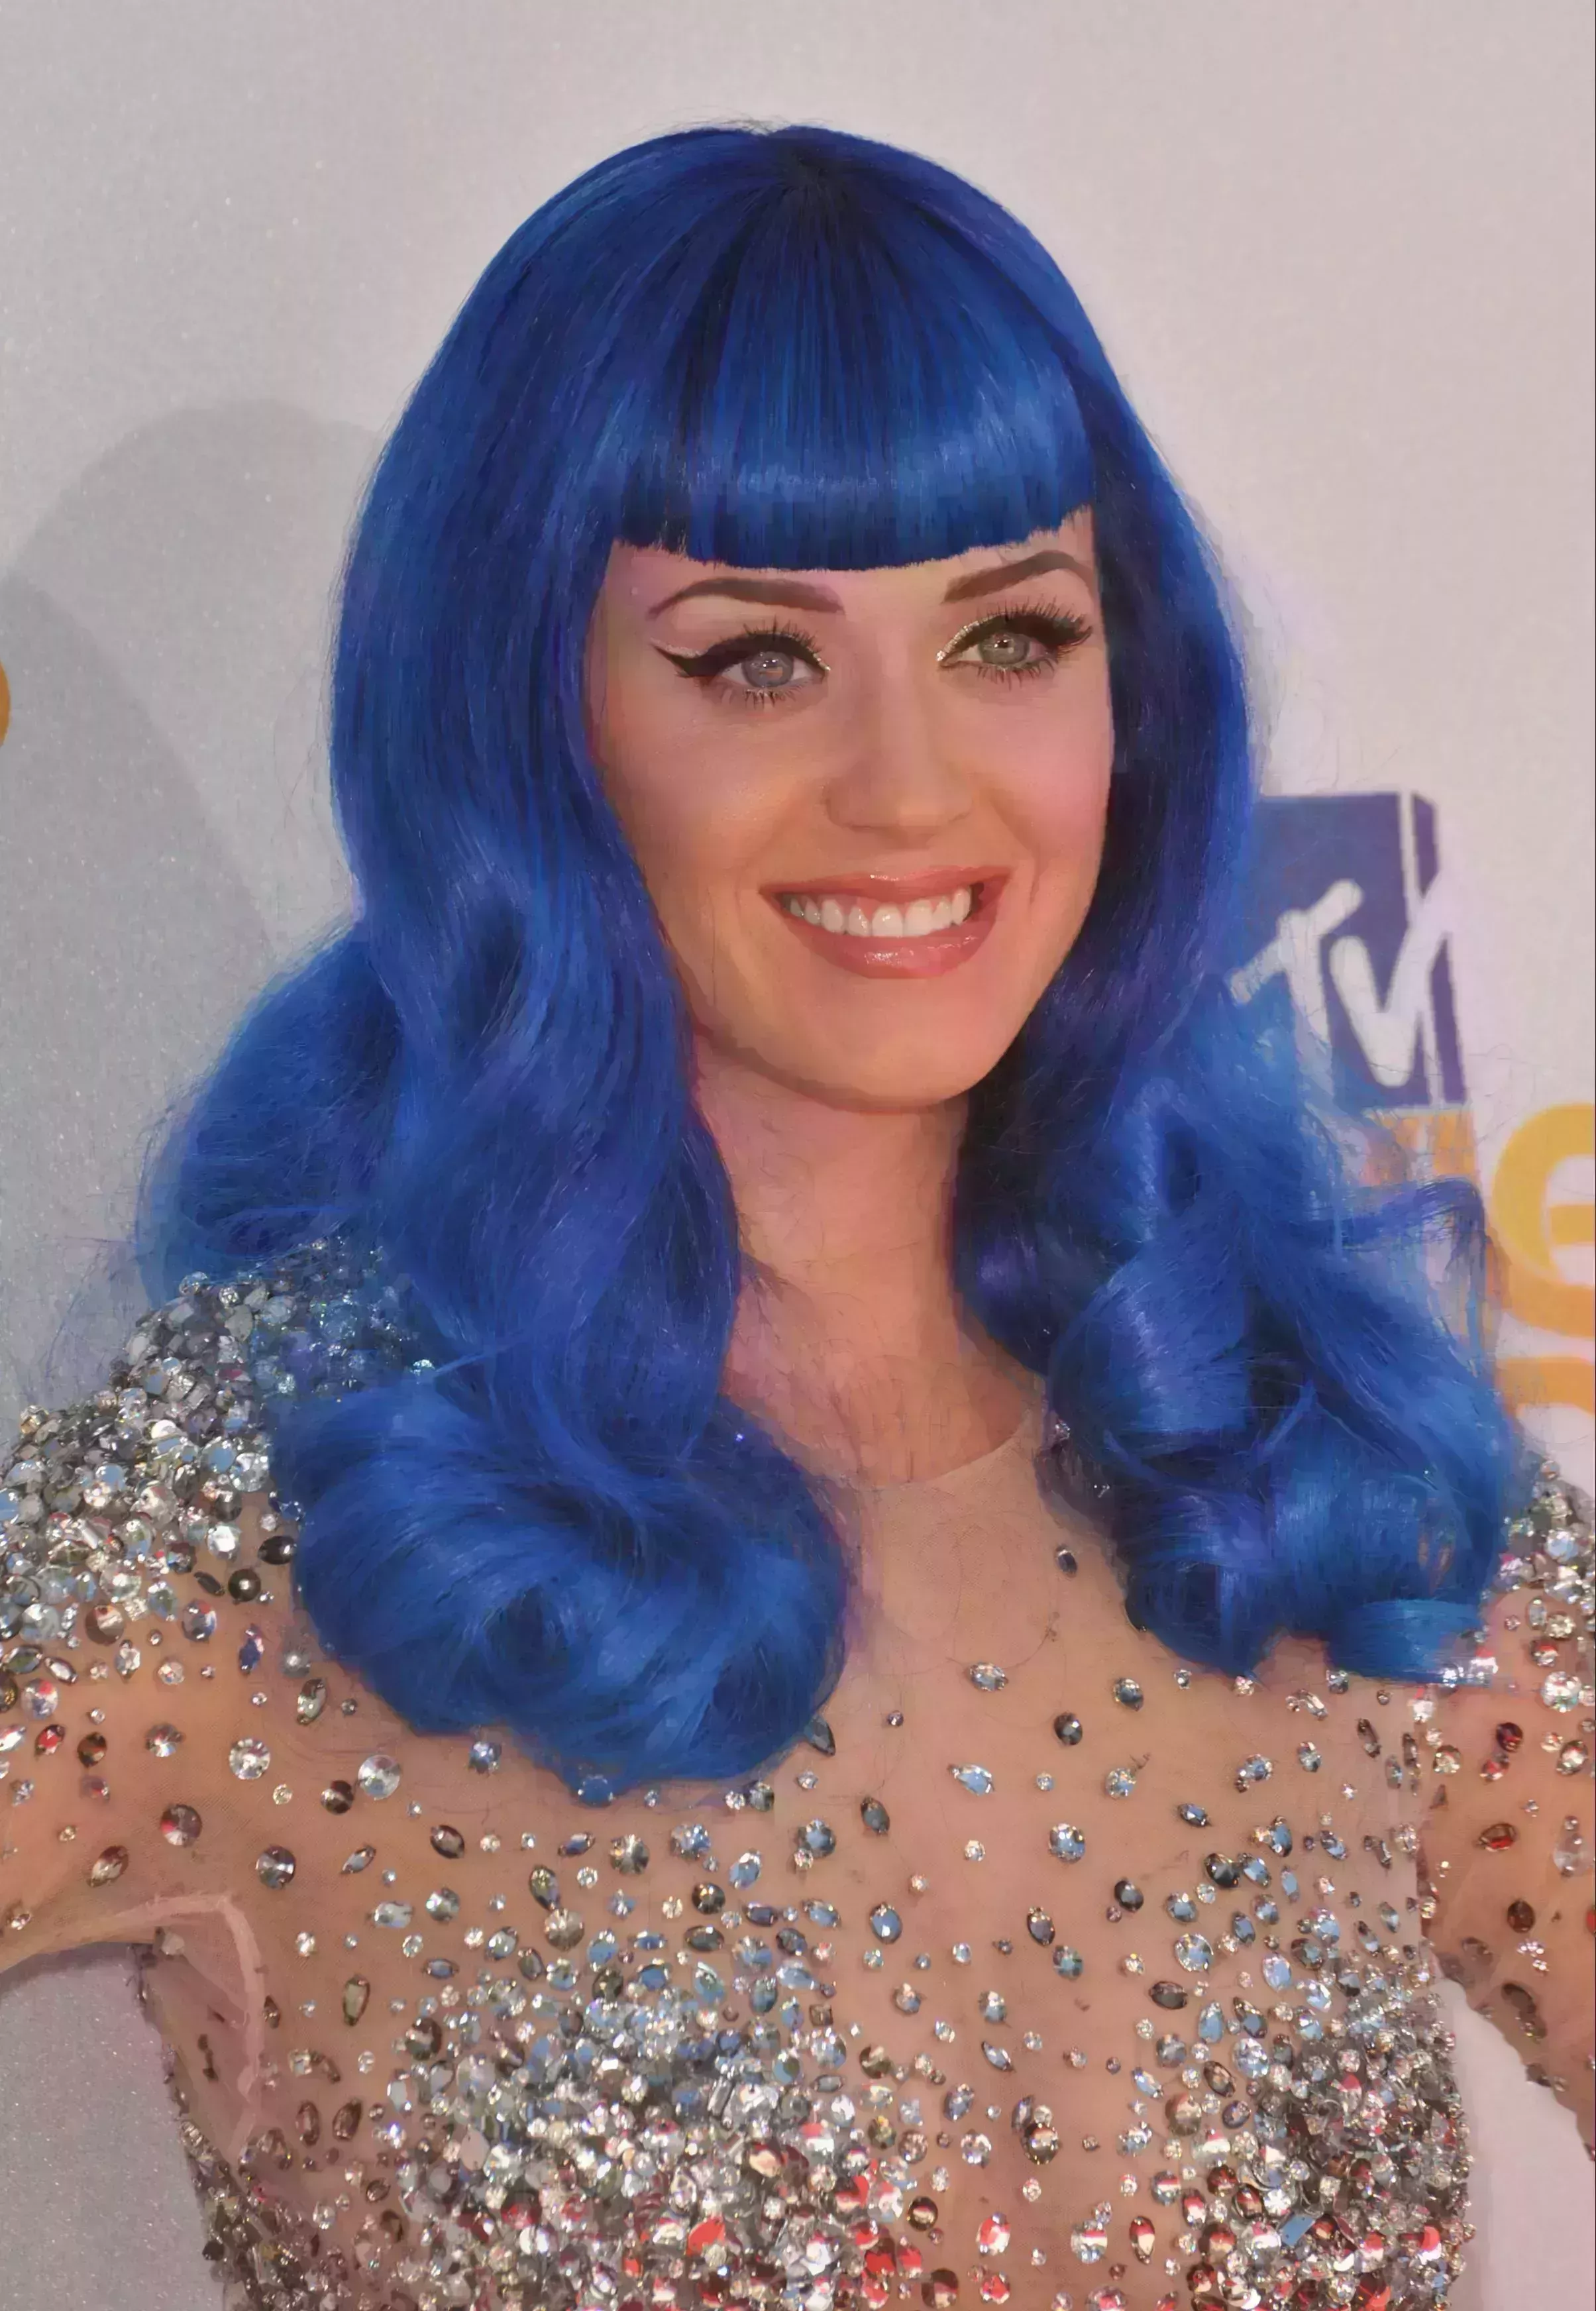 Katy Perry’s Avatar Inspired Look